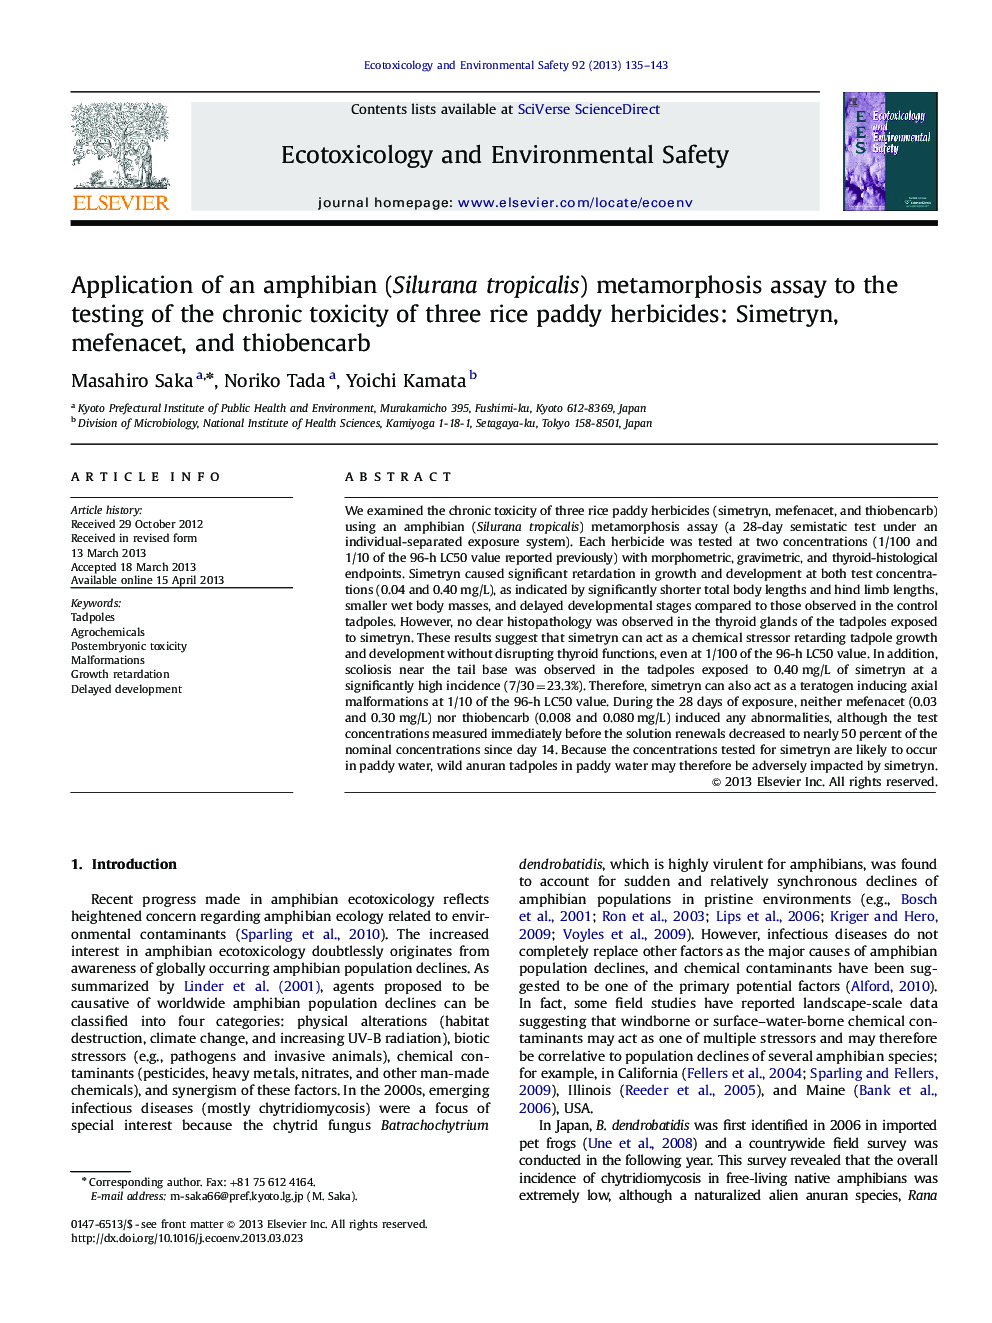 Application of an amphibian (Silurana tropicalis) metamorphosis assay to the testing of the chronic toxicity of three rice paddy herbicides: Simetryn, mefenacet, and thiobencarb